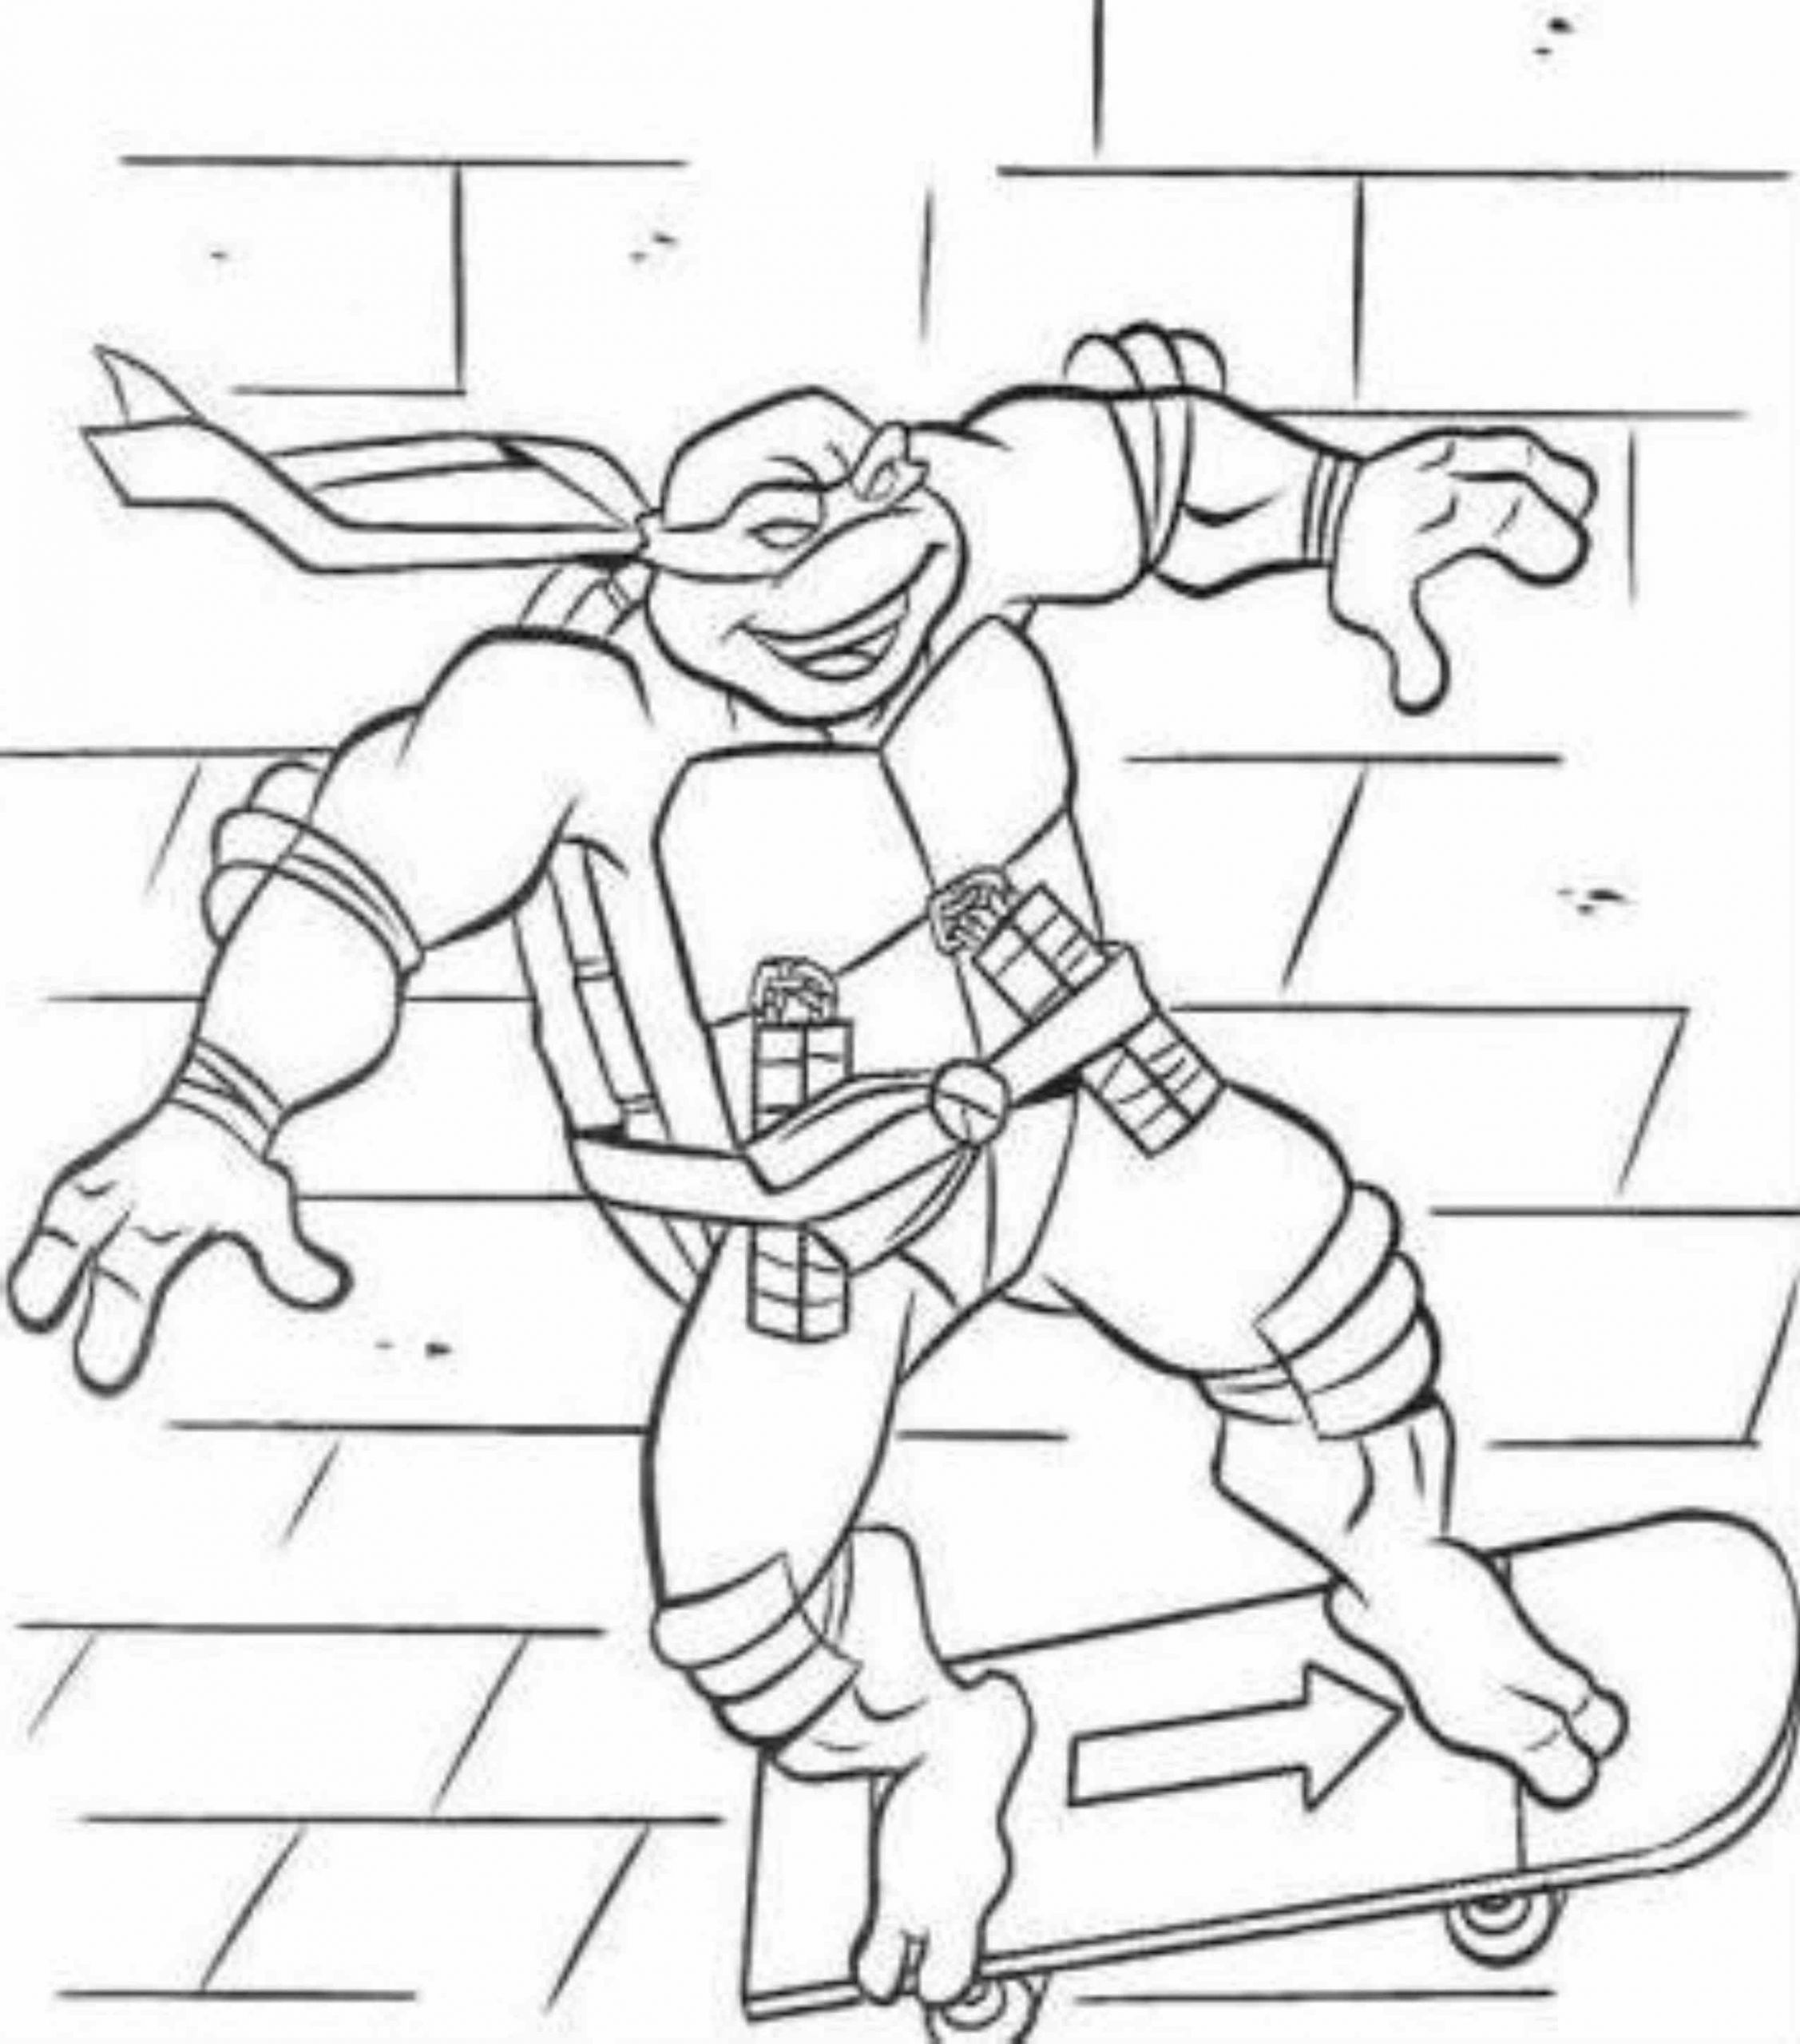 Ninja Coloring Pages For Kids
 Print & Download The Attractive Ninja Coloring Pages for